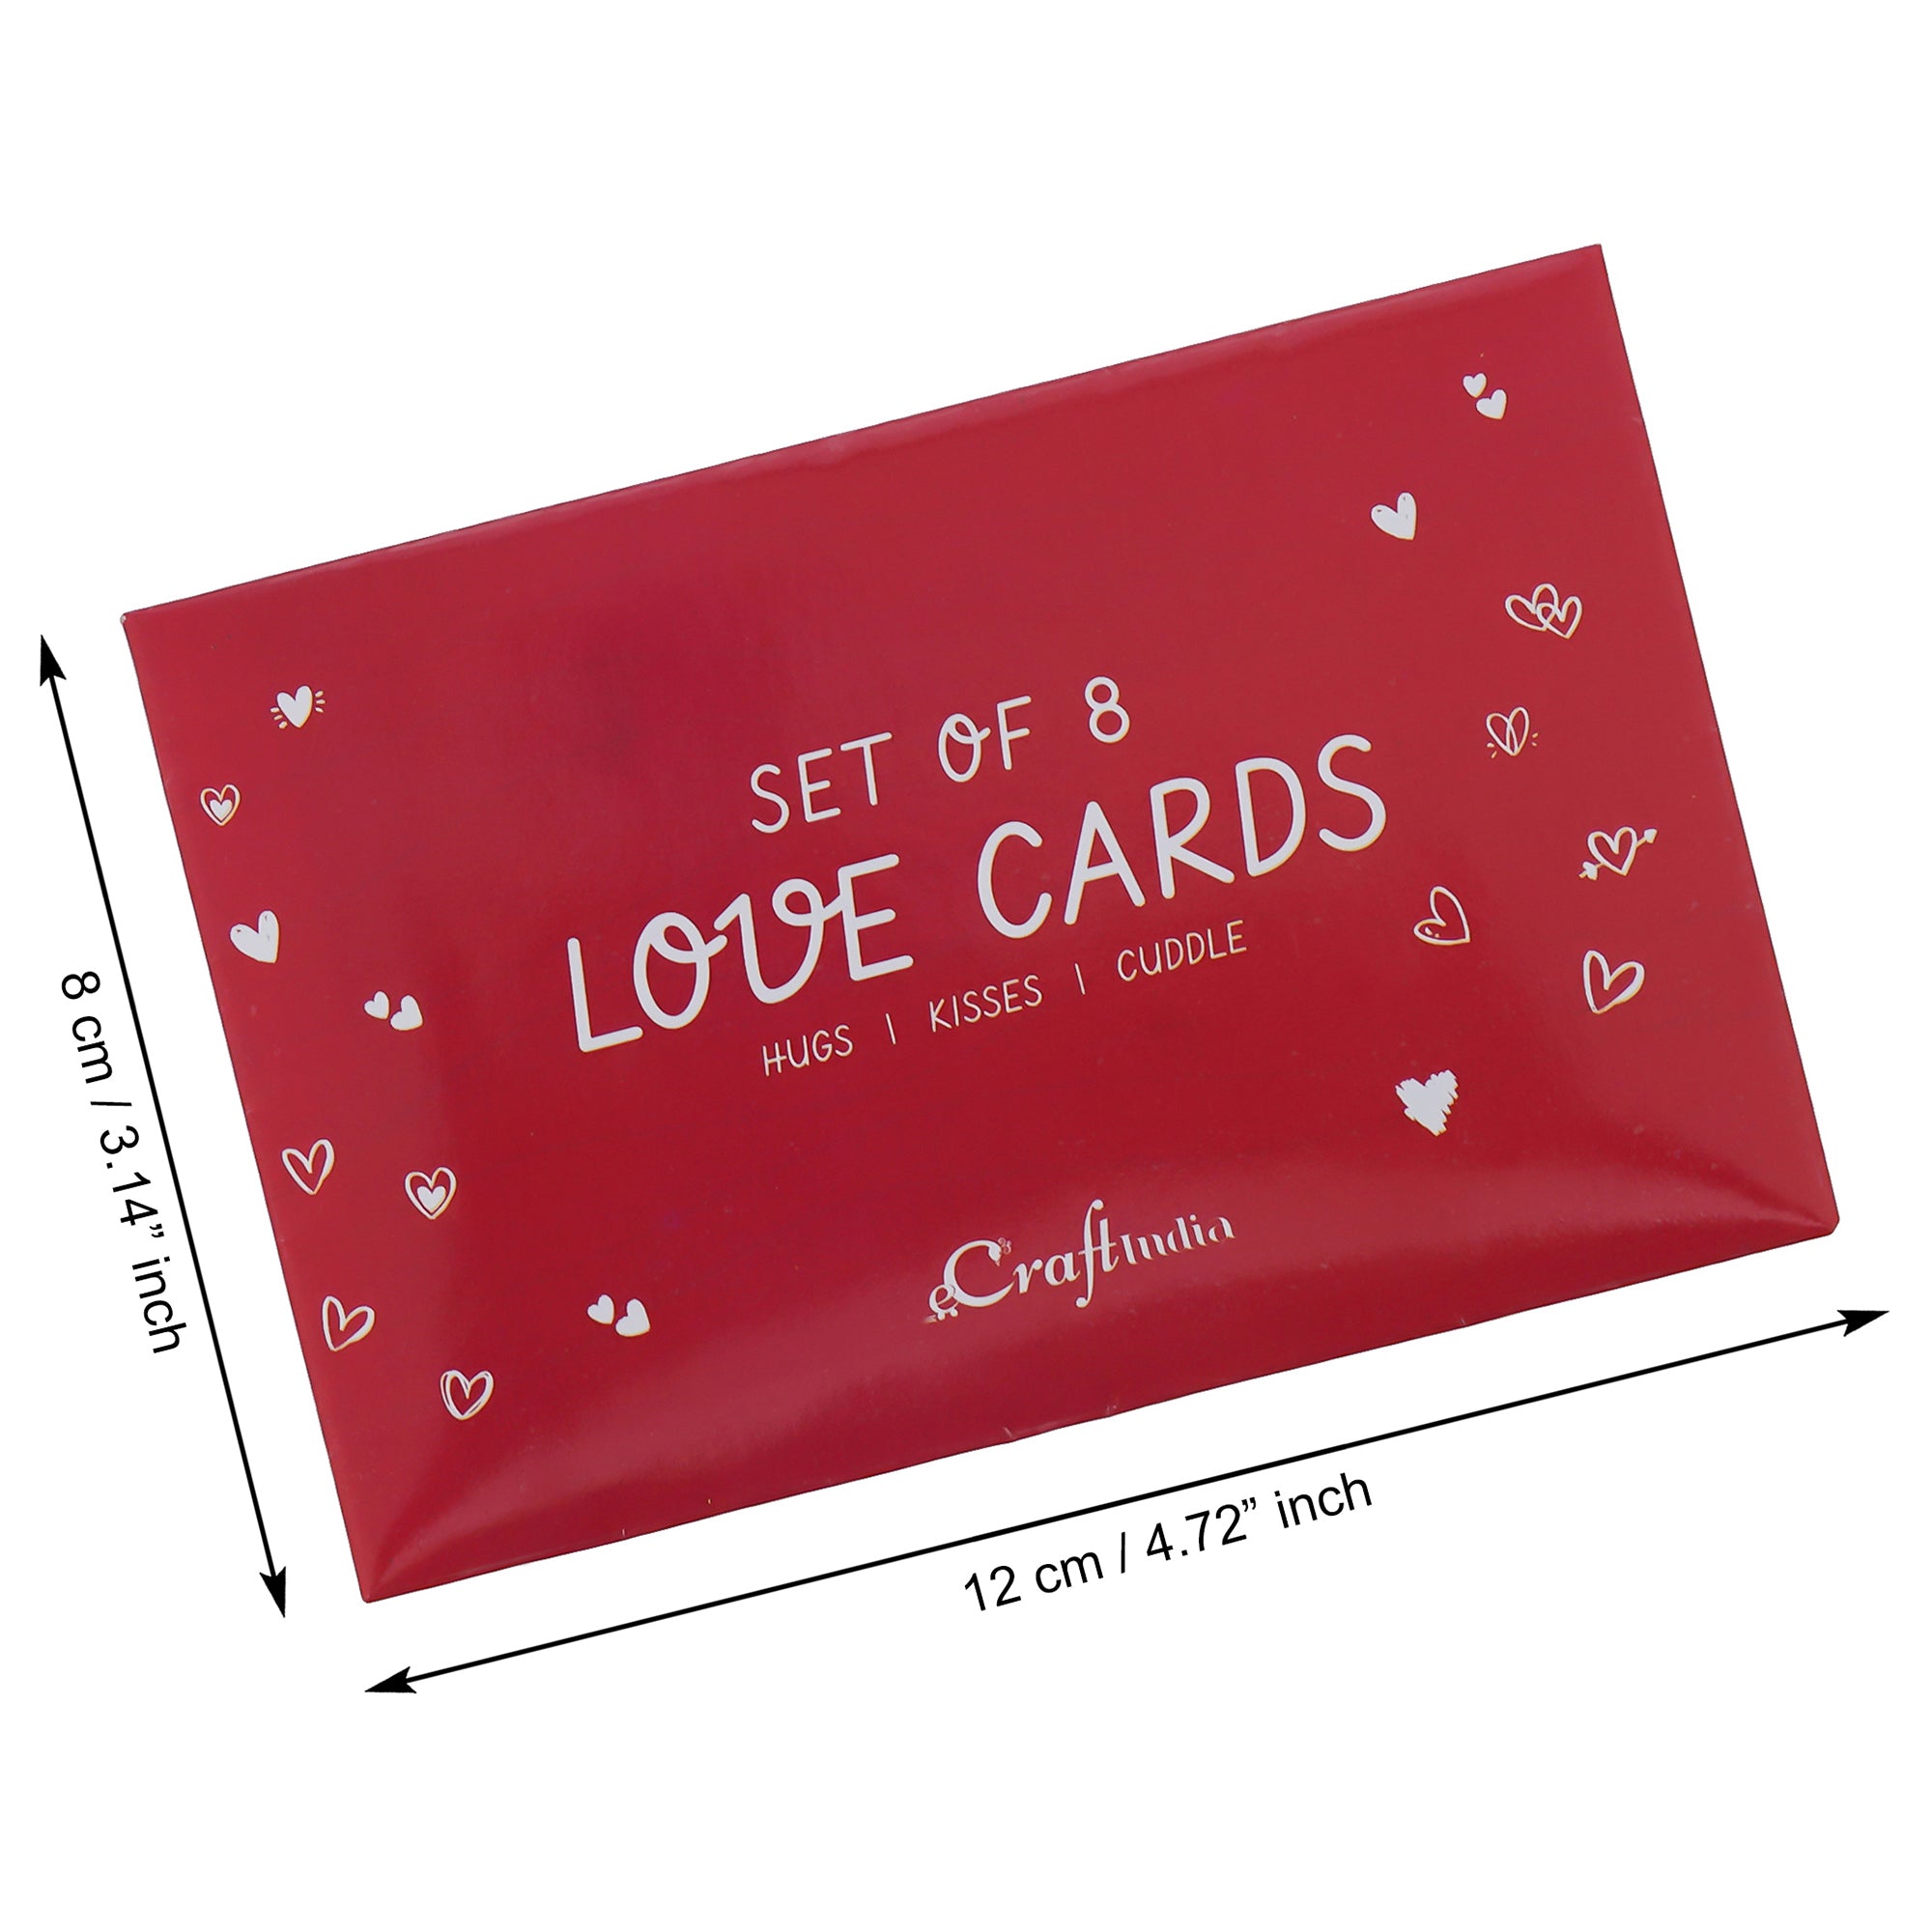 Valentine Combo of Pack of 8 Love Gift Cards, Red Gift Box with Teddy & Roses, "20 Reasons Why I Need You" Printed on Little Hearts Wooden Gift Set 2